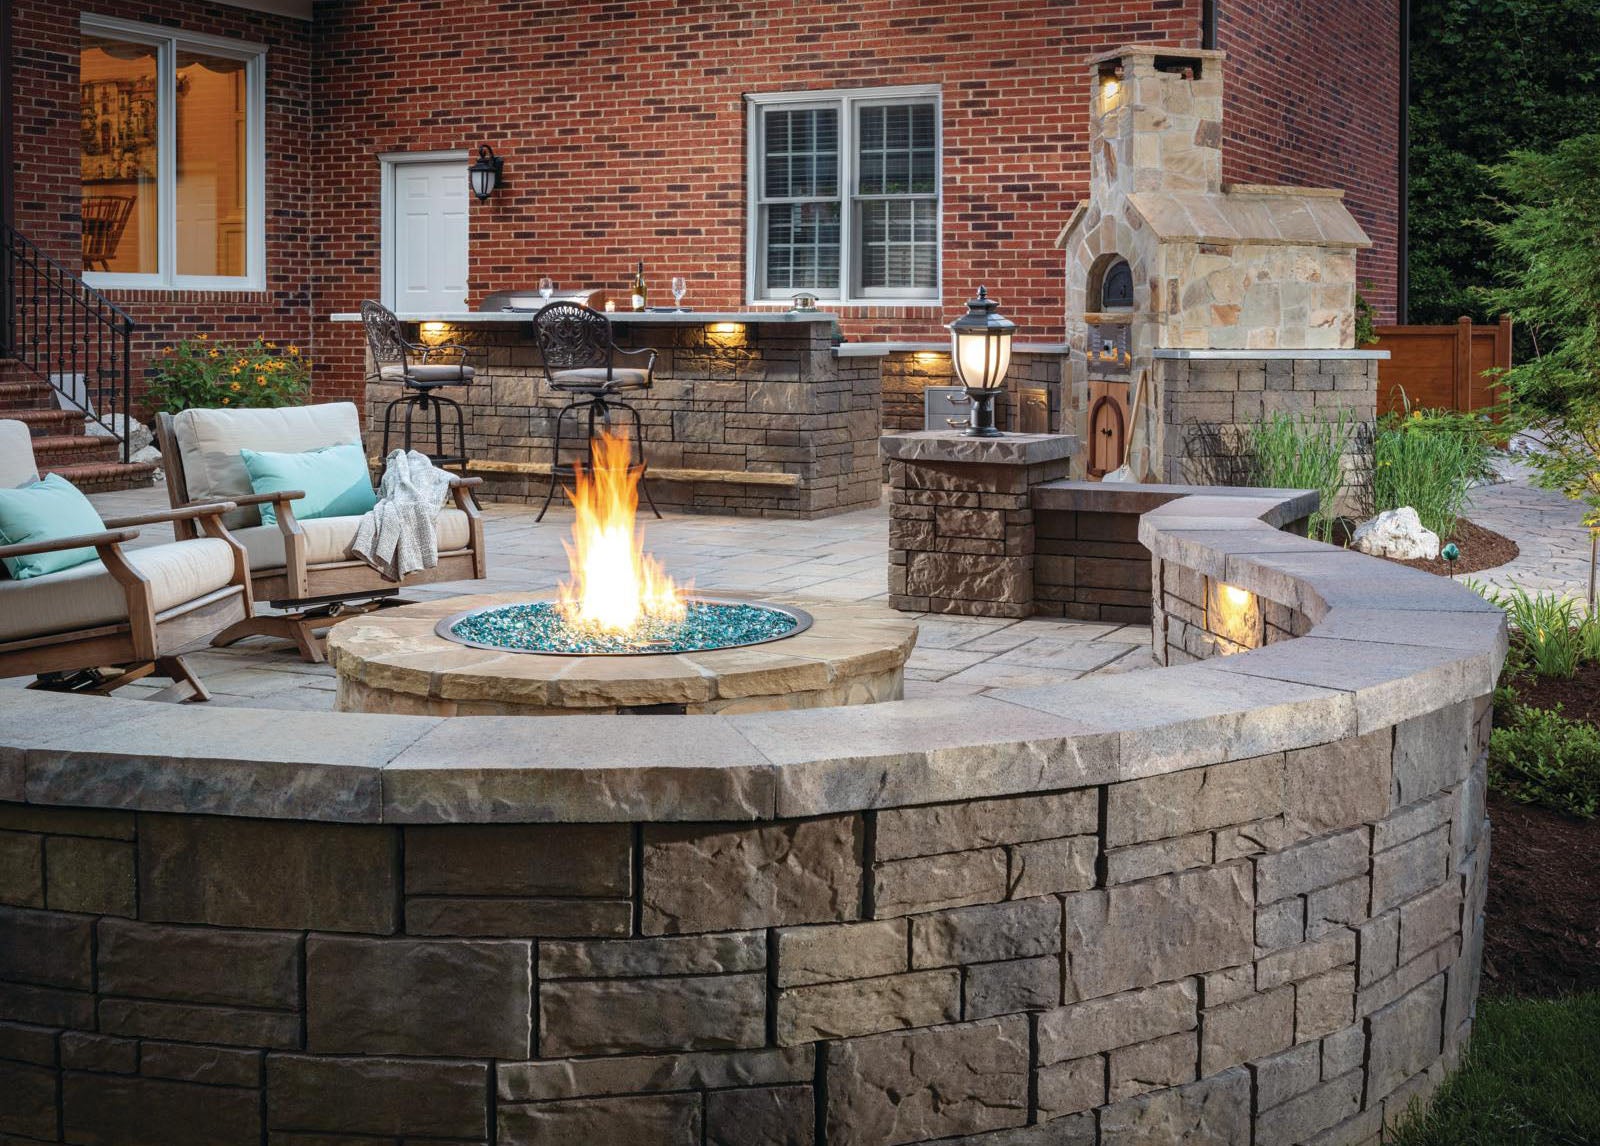 Designing A Patio Around Fire Pit, How Much Does A Custom Fire Pit Cost